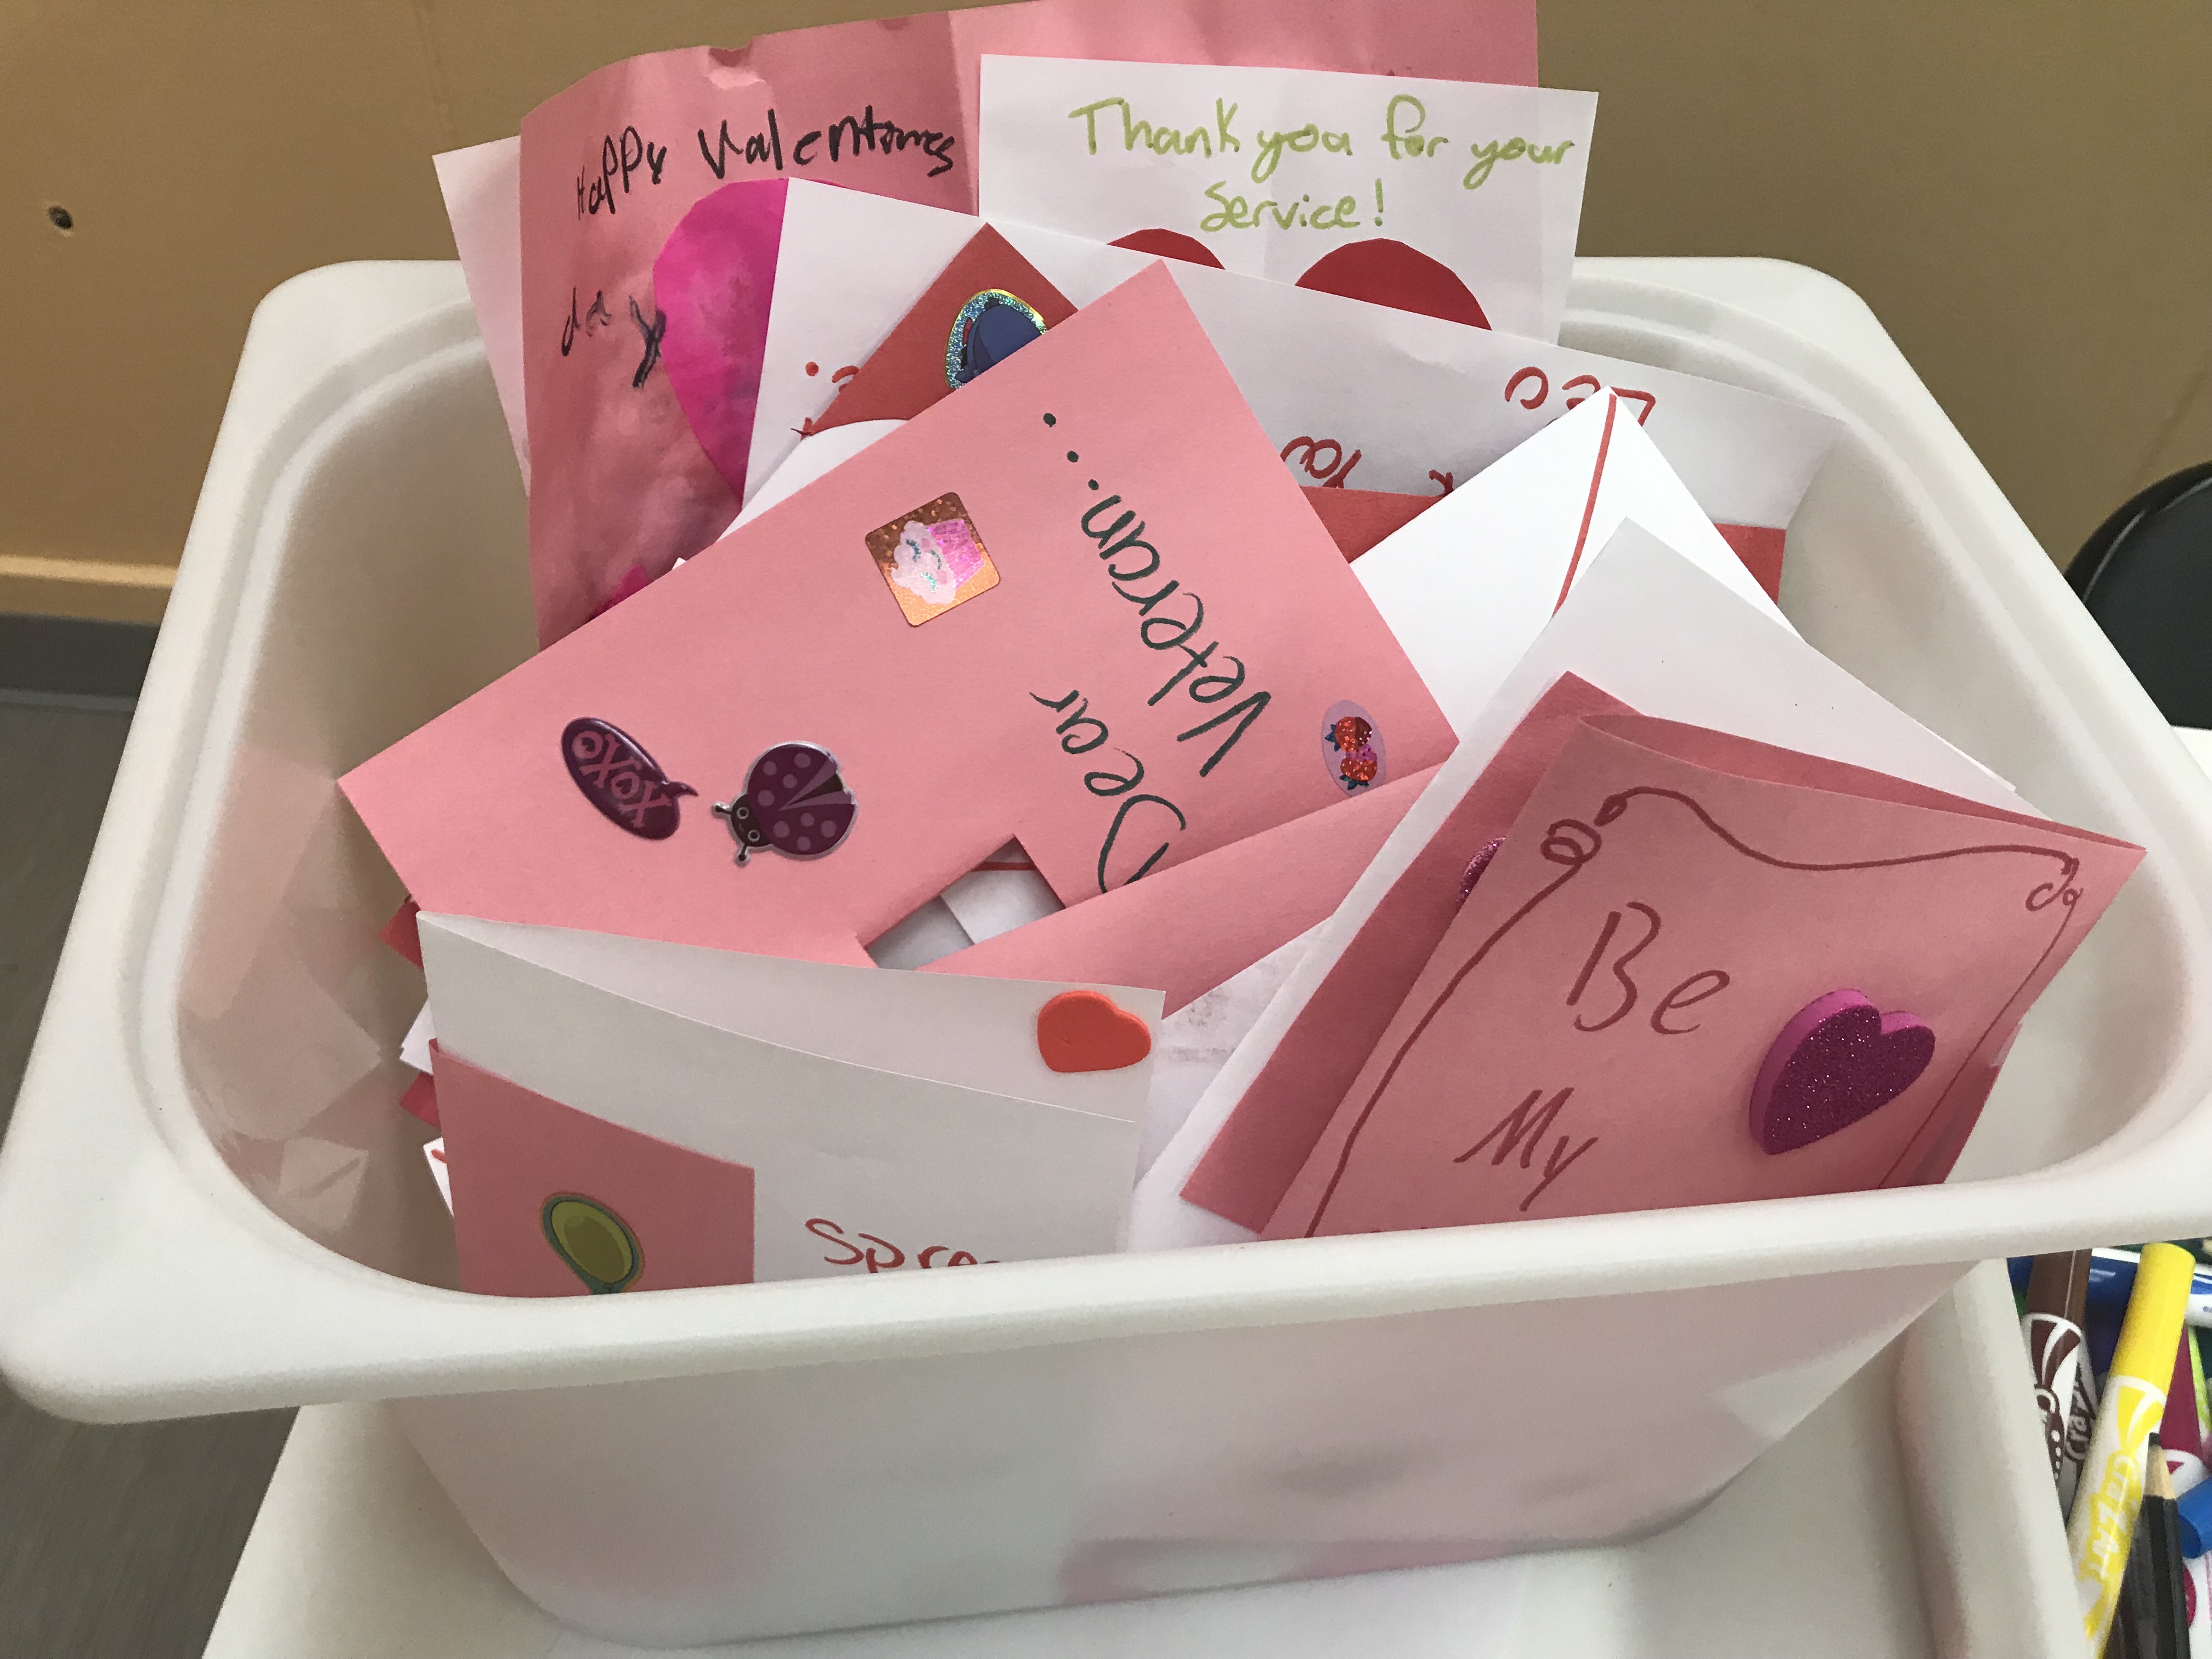 Bunker Valentine's Day cards in a container.